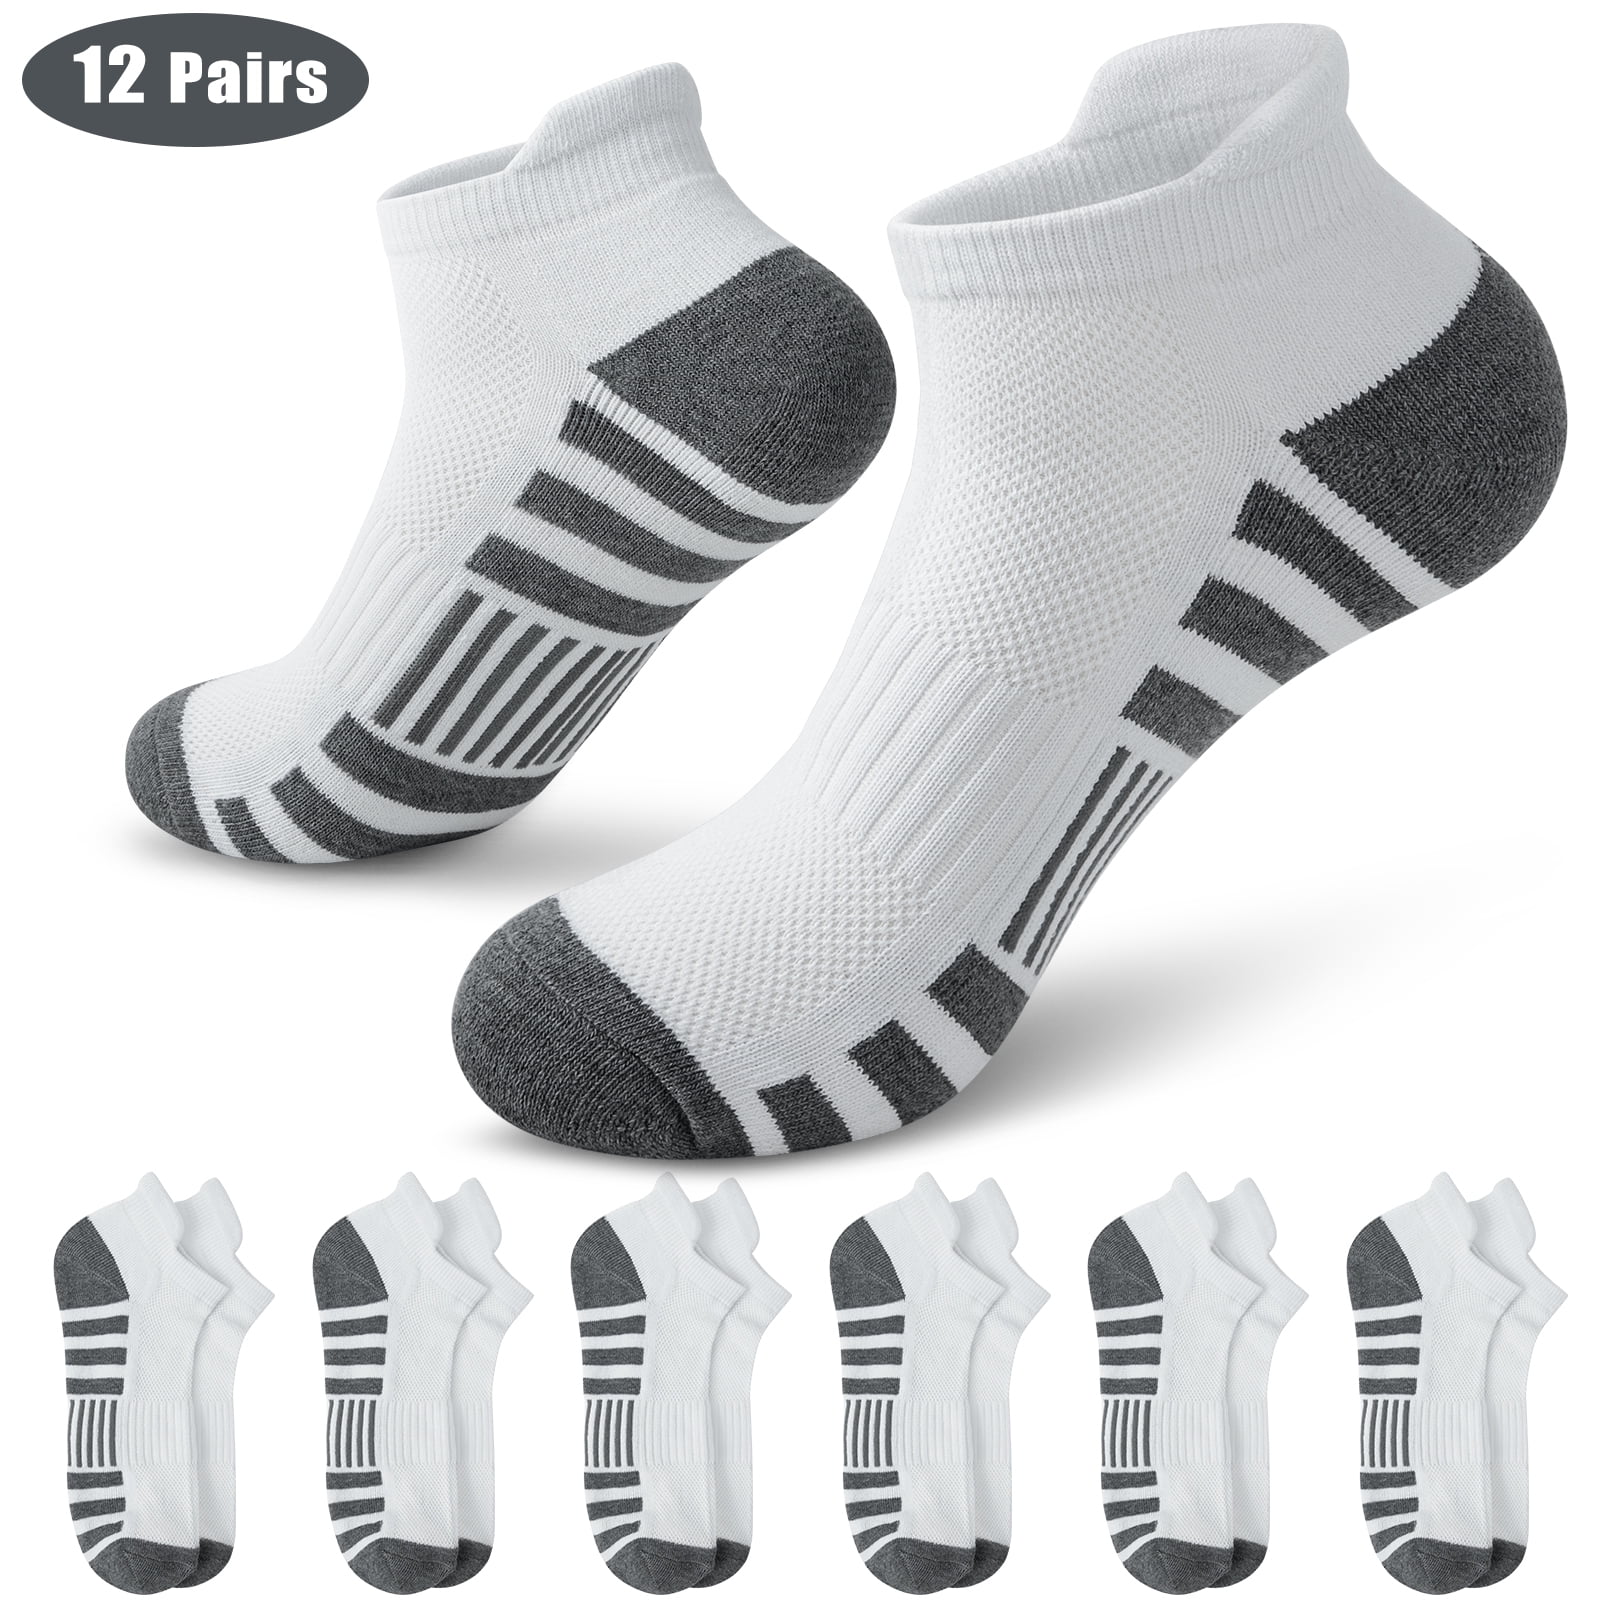 Loritta 12 Pairs Mens Ankle Athletic Low Cut Sports Socks Cushioned ...